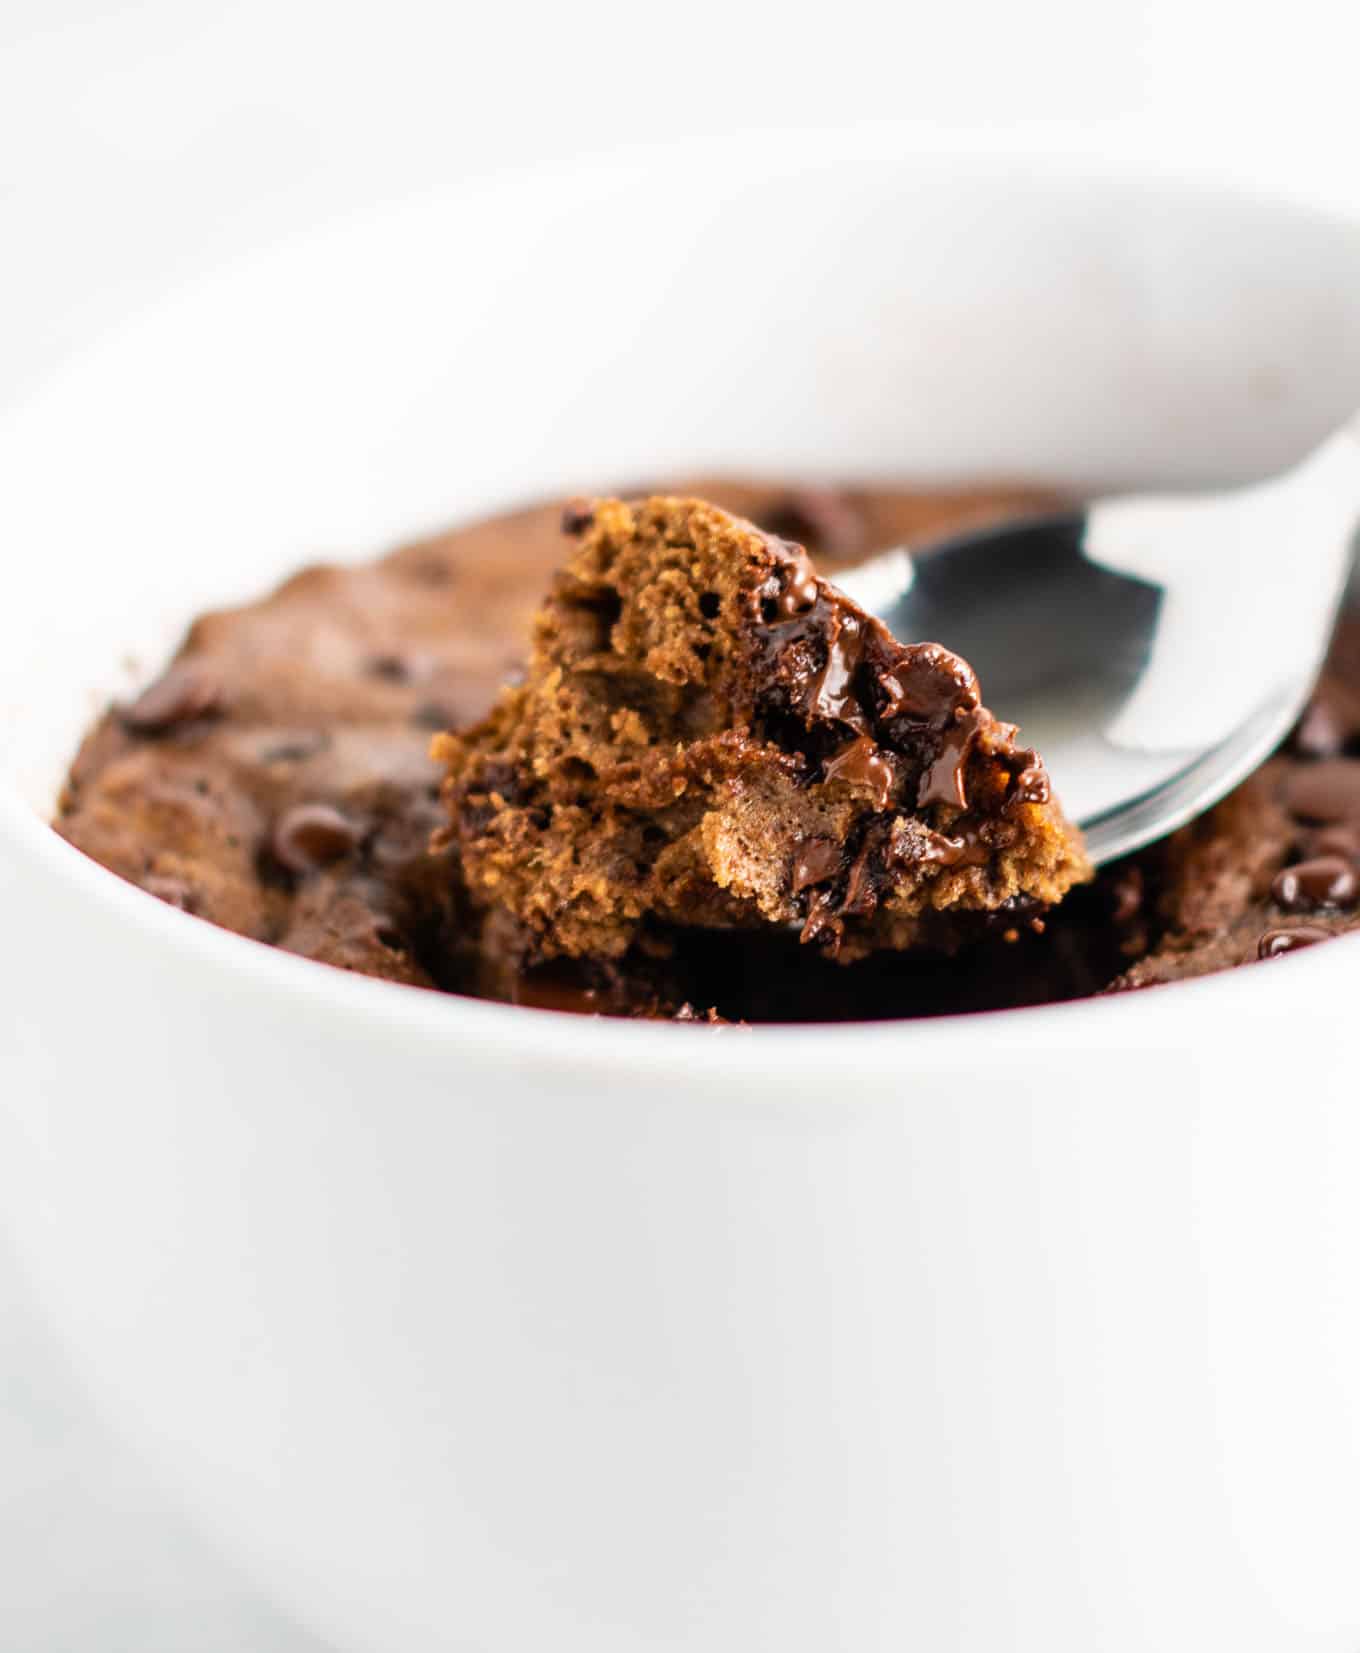 chocolate mug cake made with easy to find flours. Perfectly fluffy and so decadent - serve with ice cream!